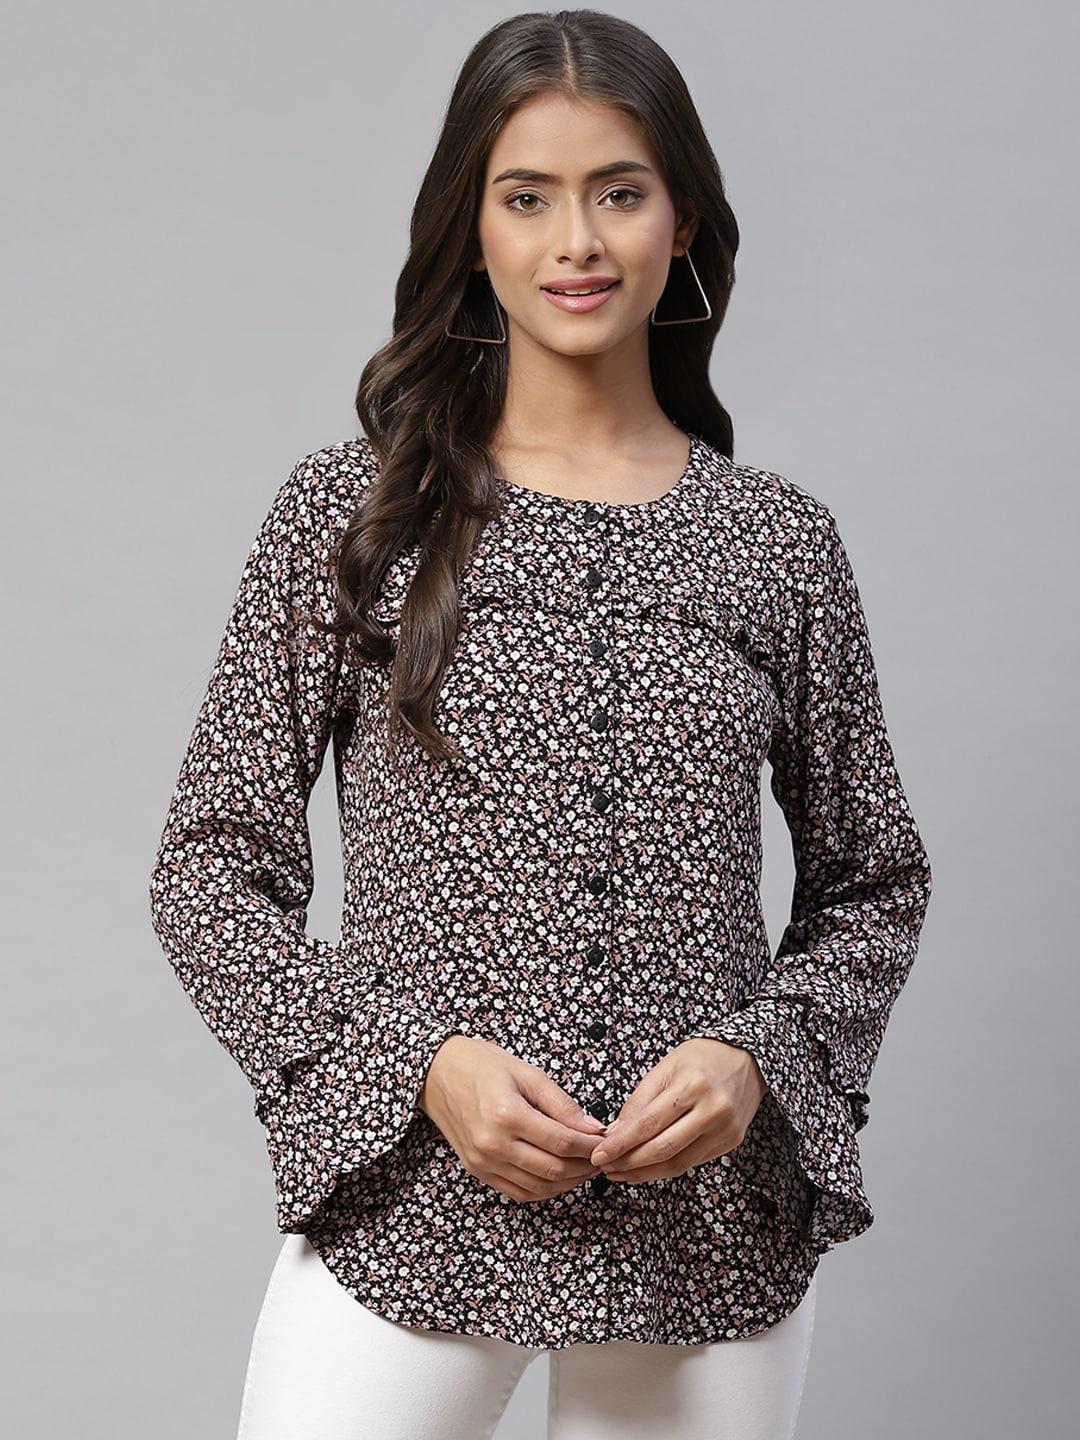 Ayaany Women Black & White Floral Print Shirt Style Top